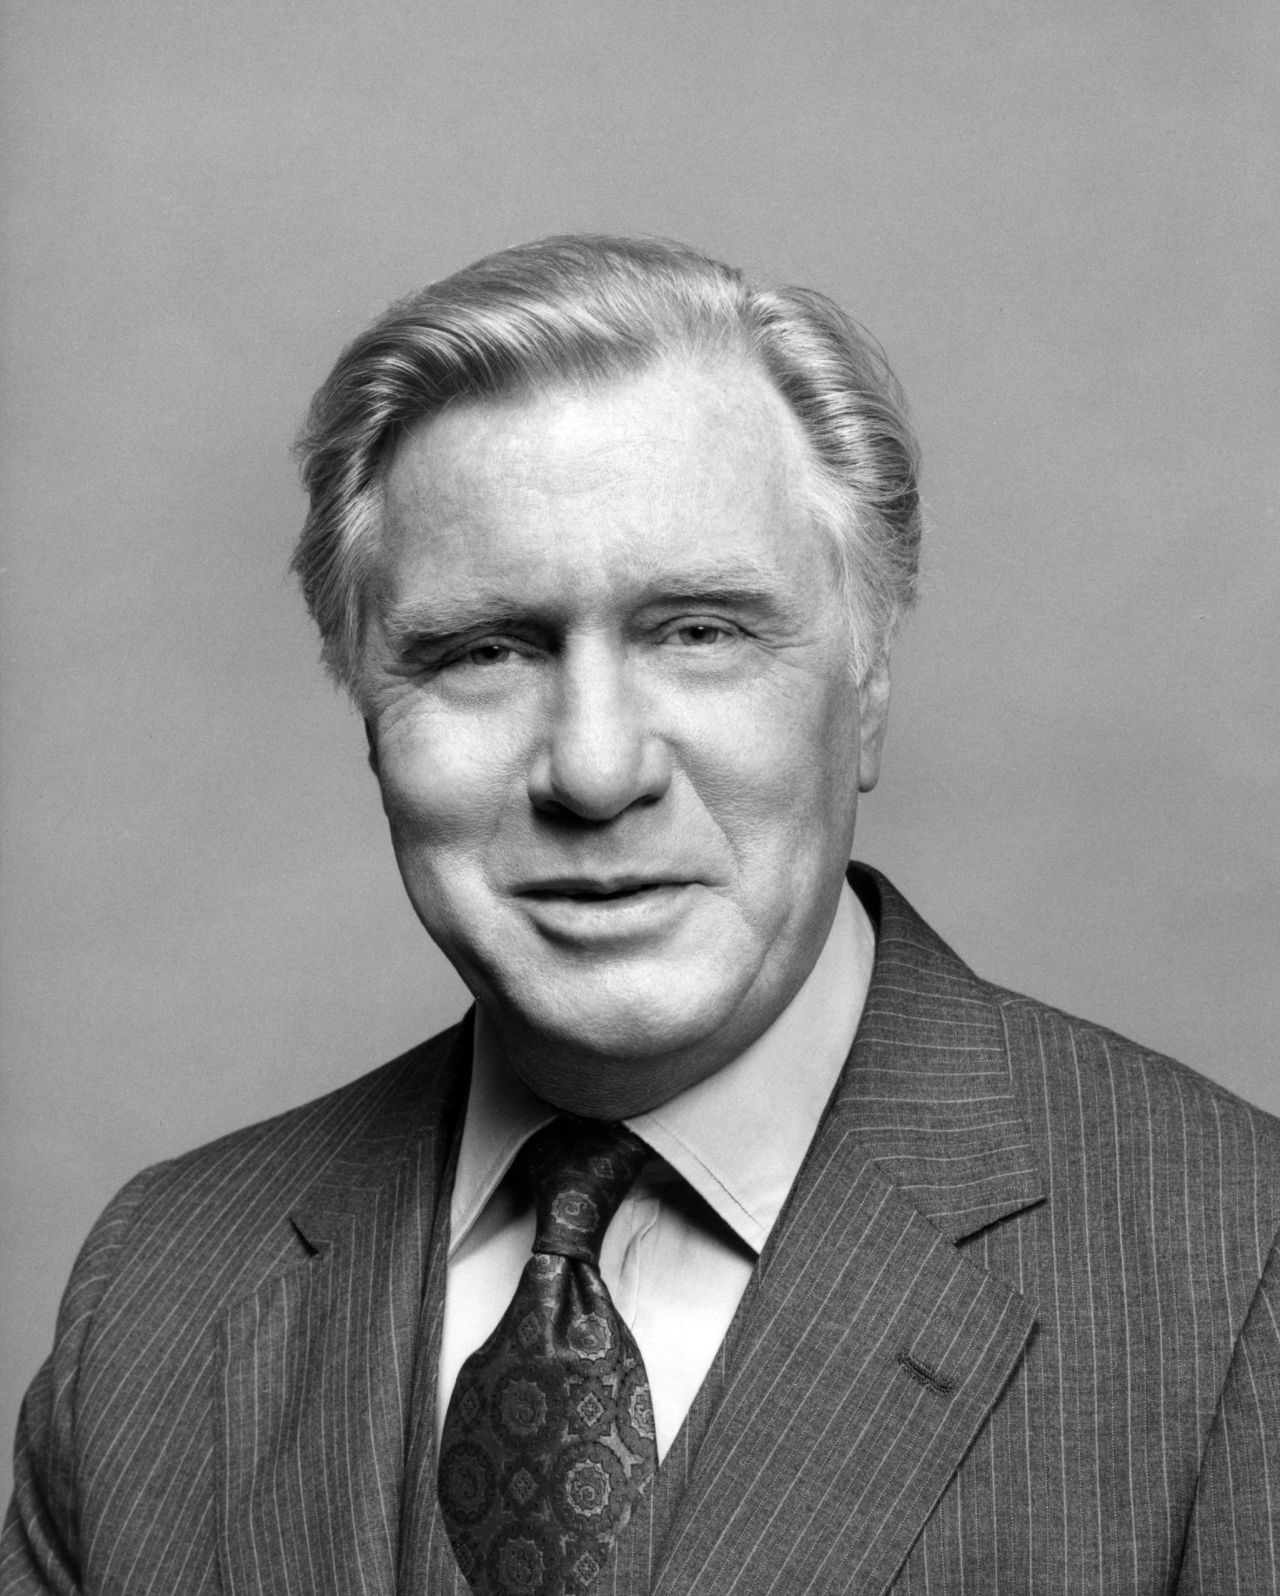 <a href="http://www.cnn.com/2016/02/17/entertainment/george-gaynes-obit-feat/" target="_blank">George Gaynes</a>, the veteran actor best known for "Punky Brewster" and the "Police Academy" films, died on February 15. He was 98.